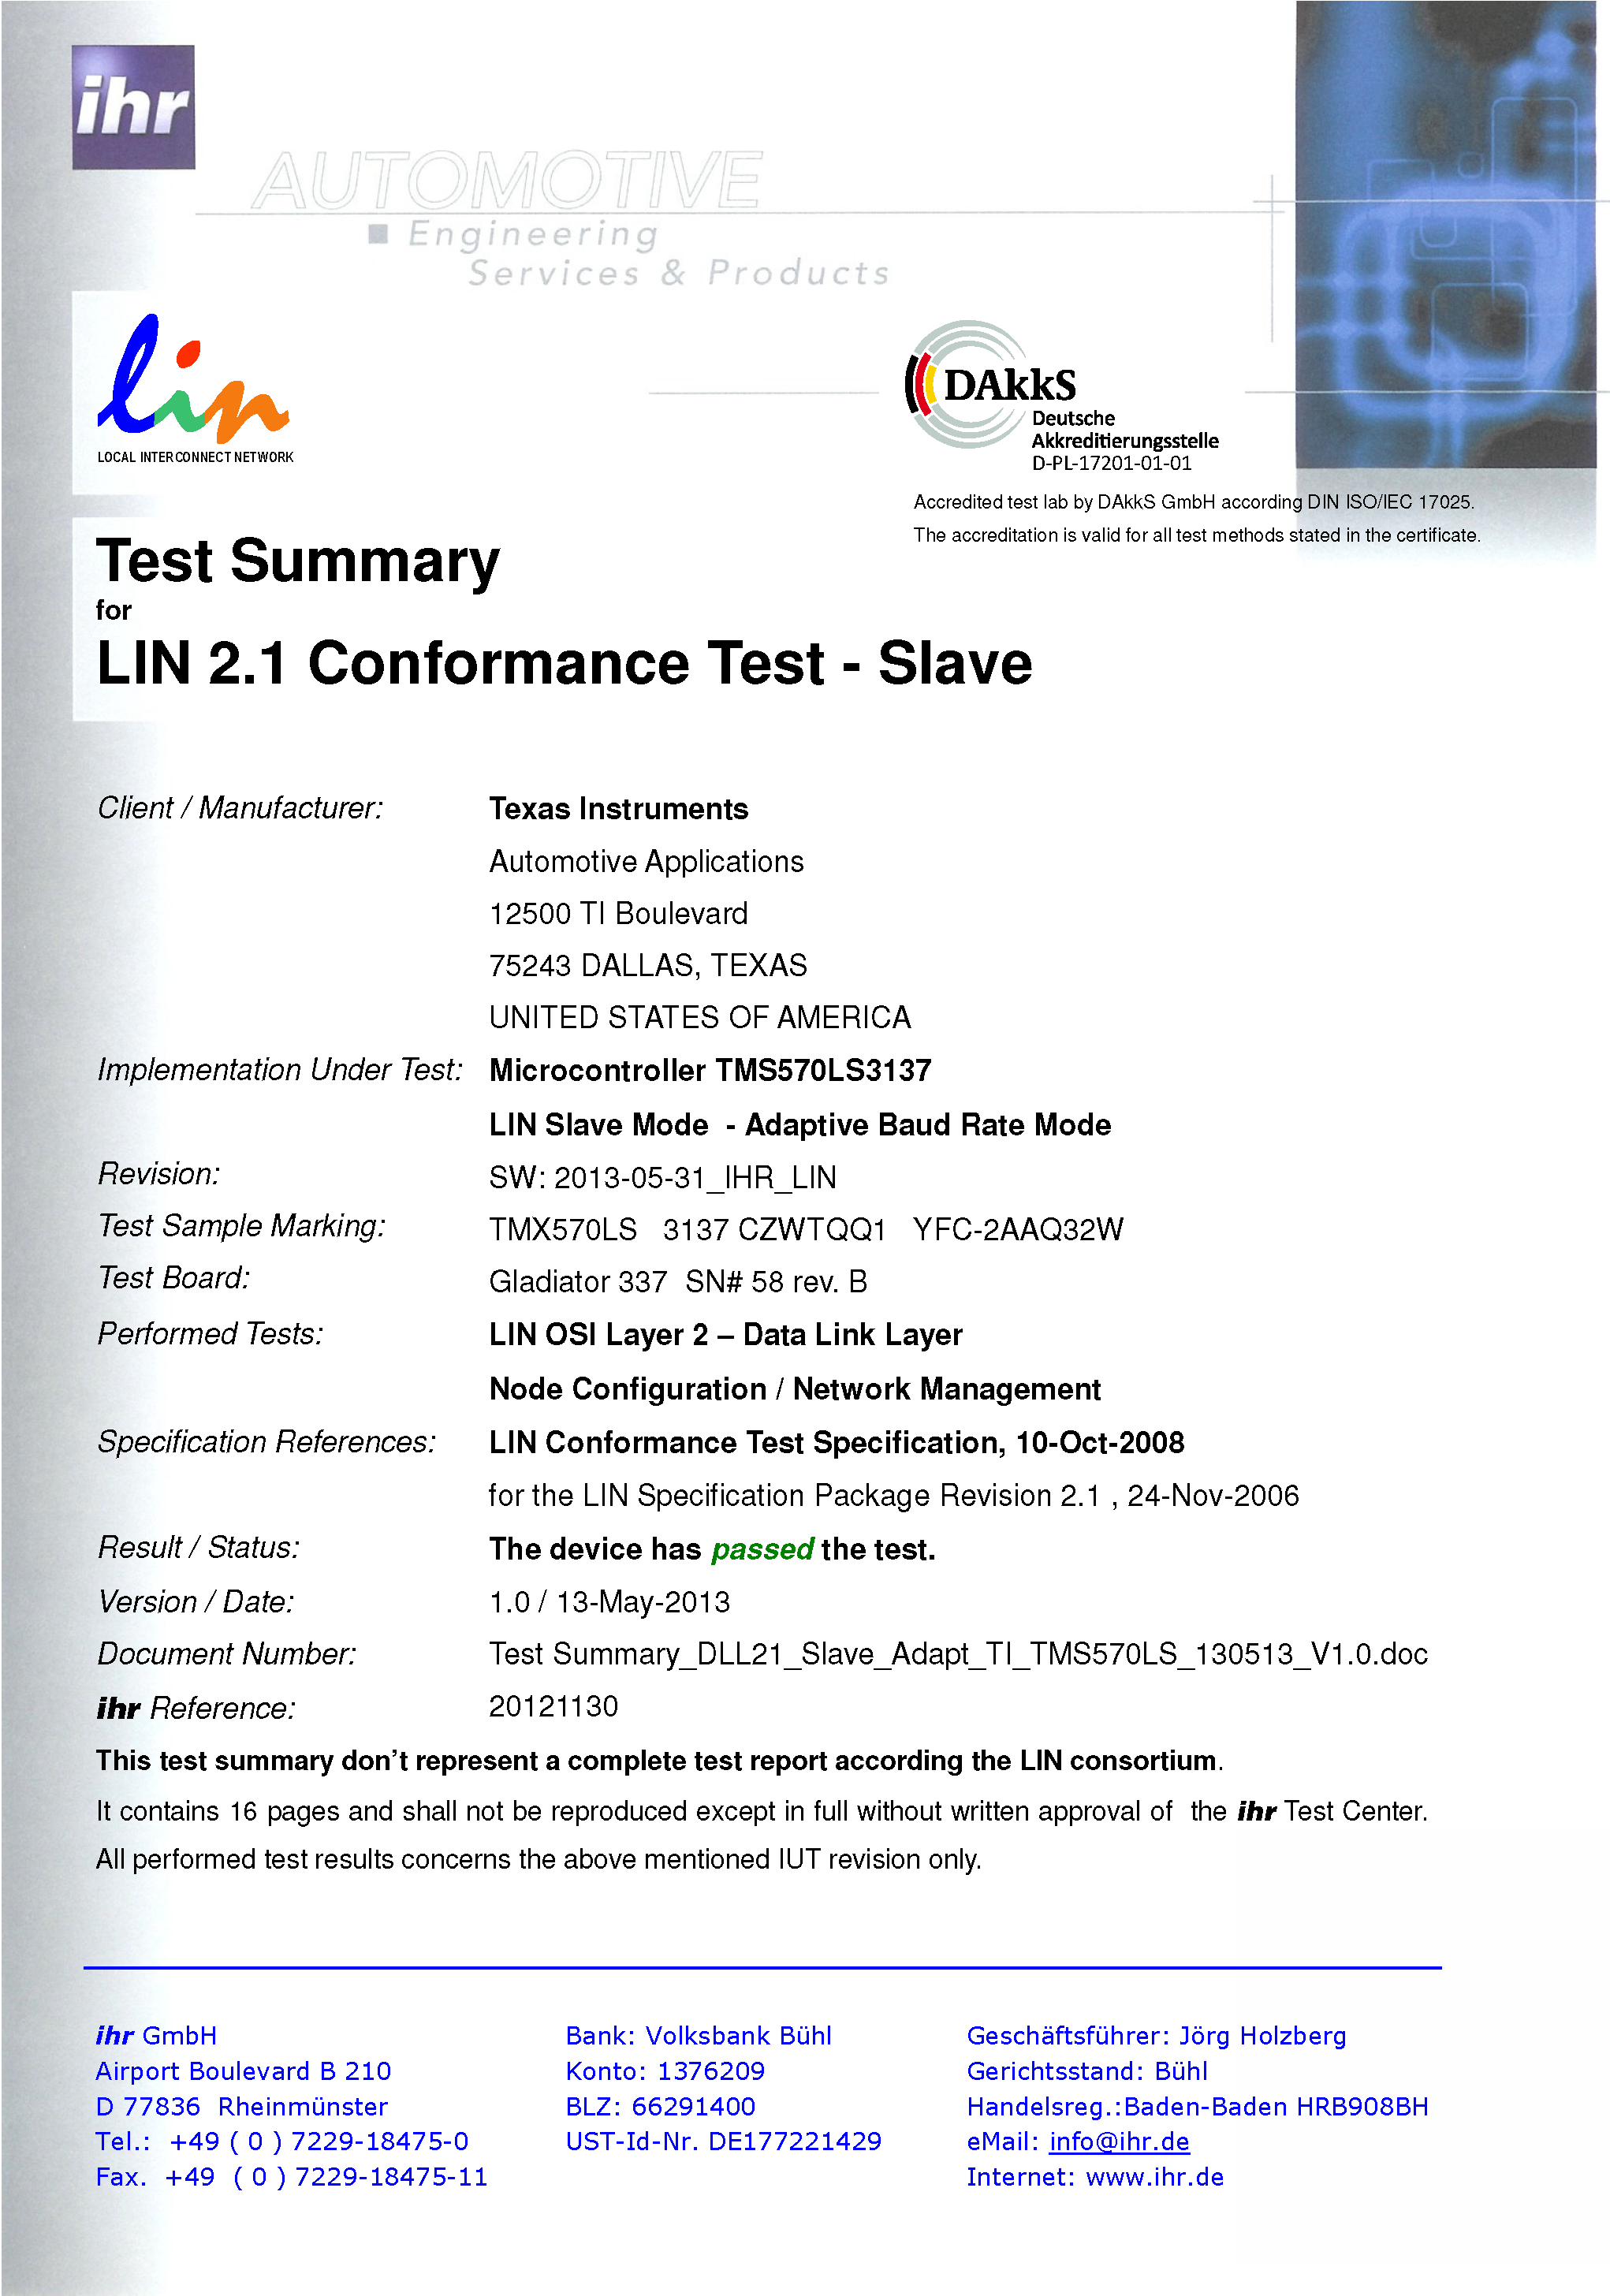 RM46L440 RM46L840 new_LIN_Certification_Slave_Adapt.png